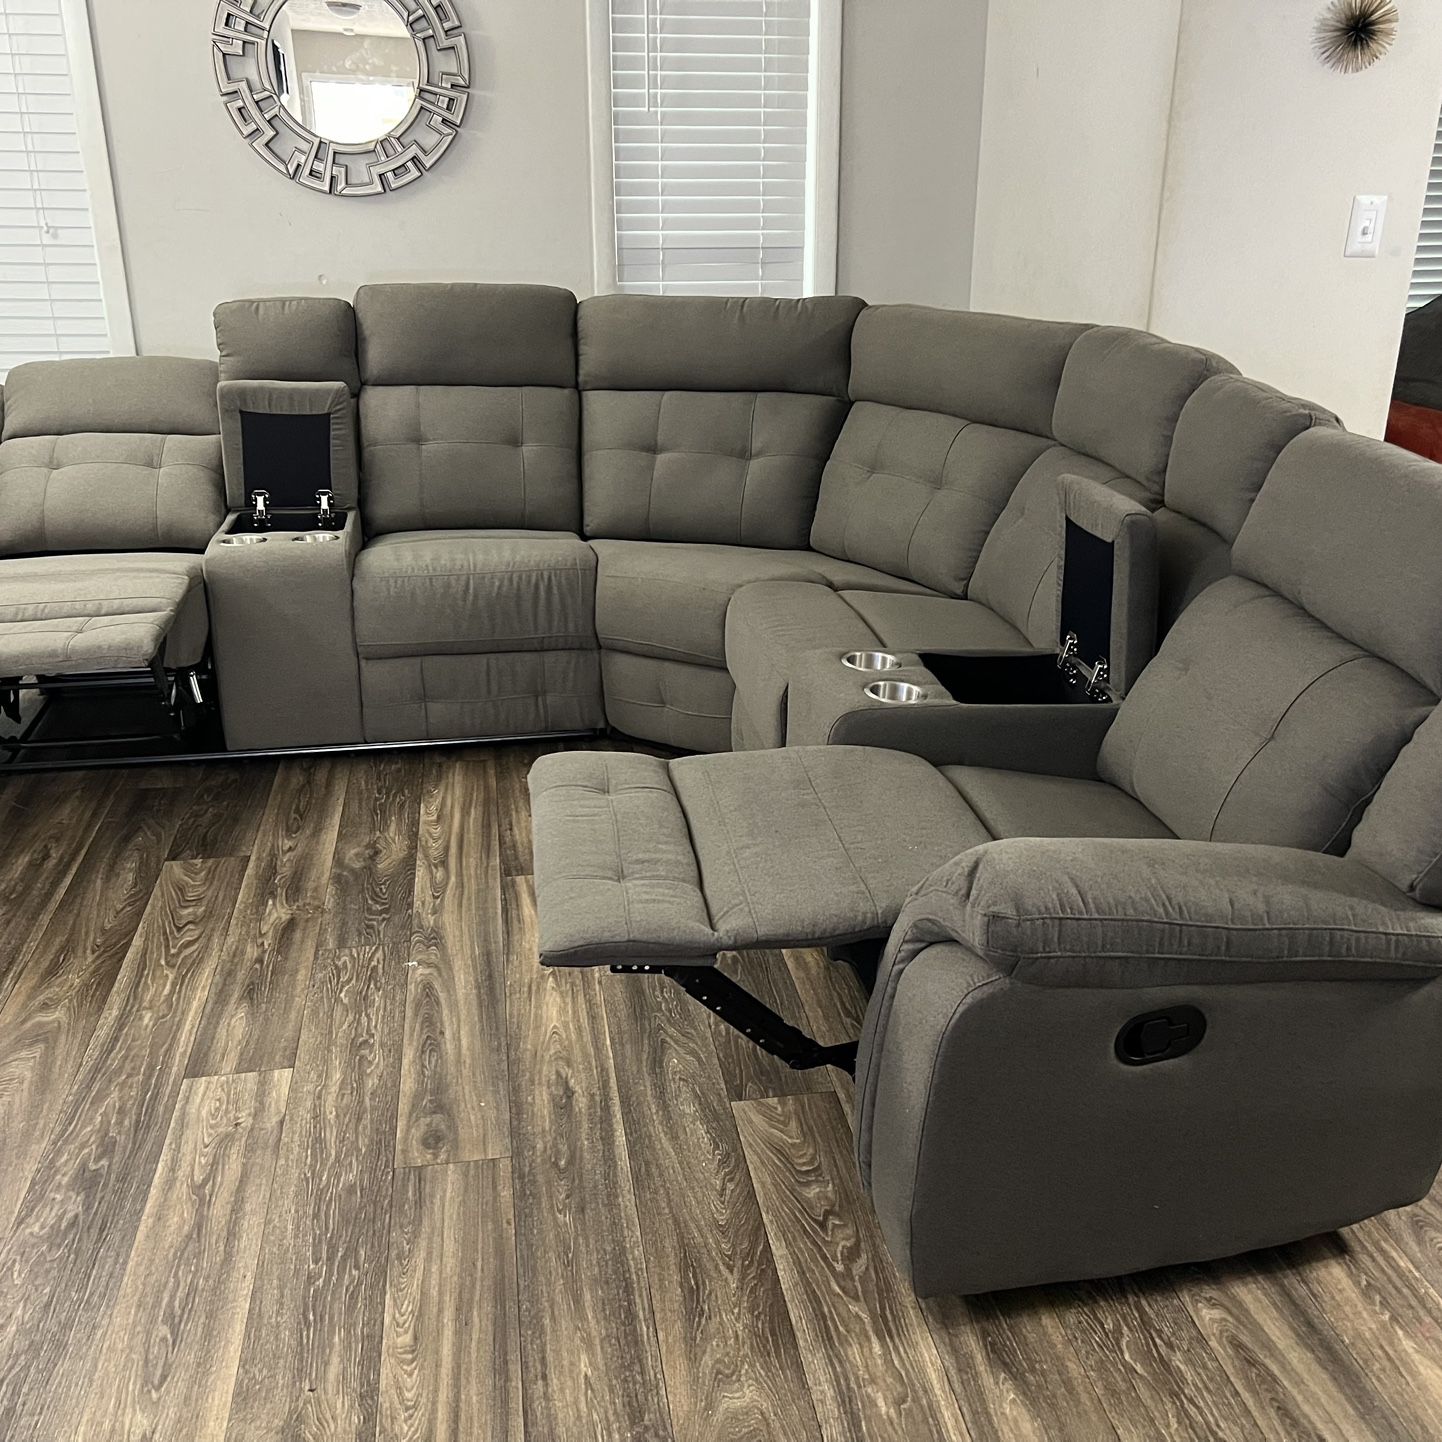 BRAND NEW GIGANTIC OVERSIZED RECLINER SECTIONAL  $1275 INCLUDING DELIVERY!! 